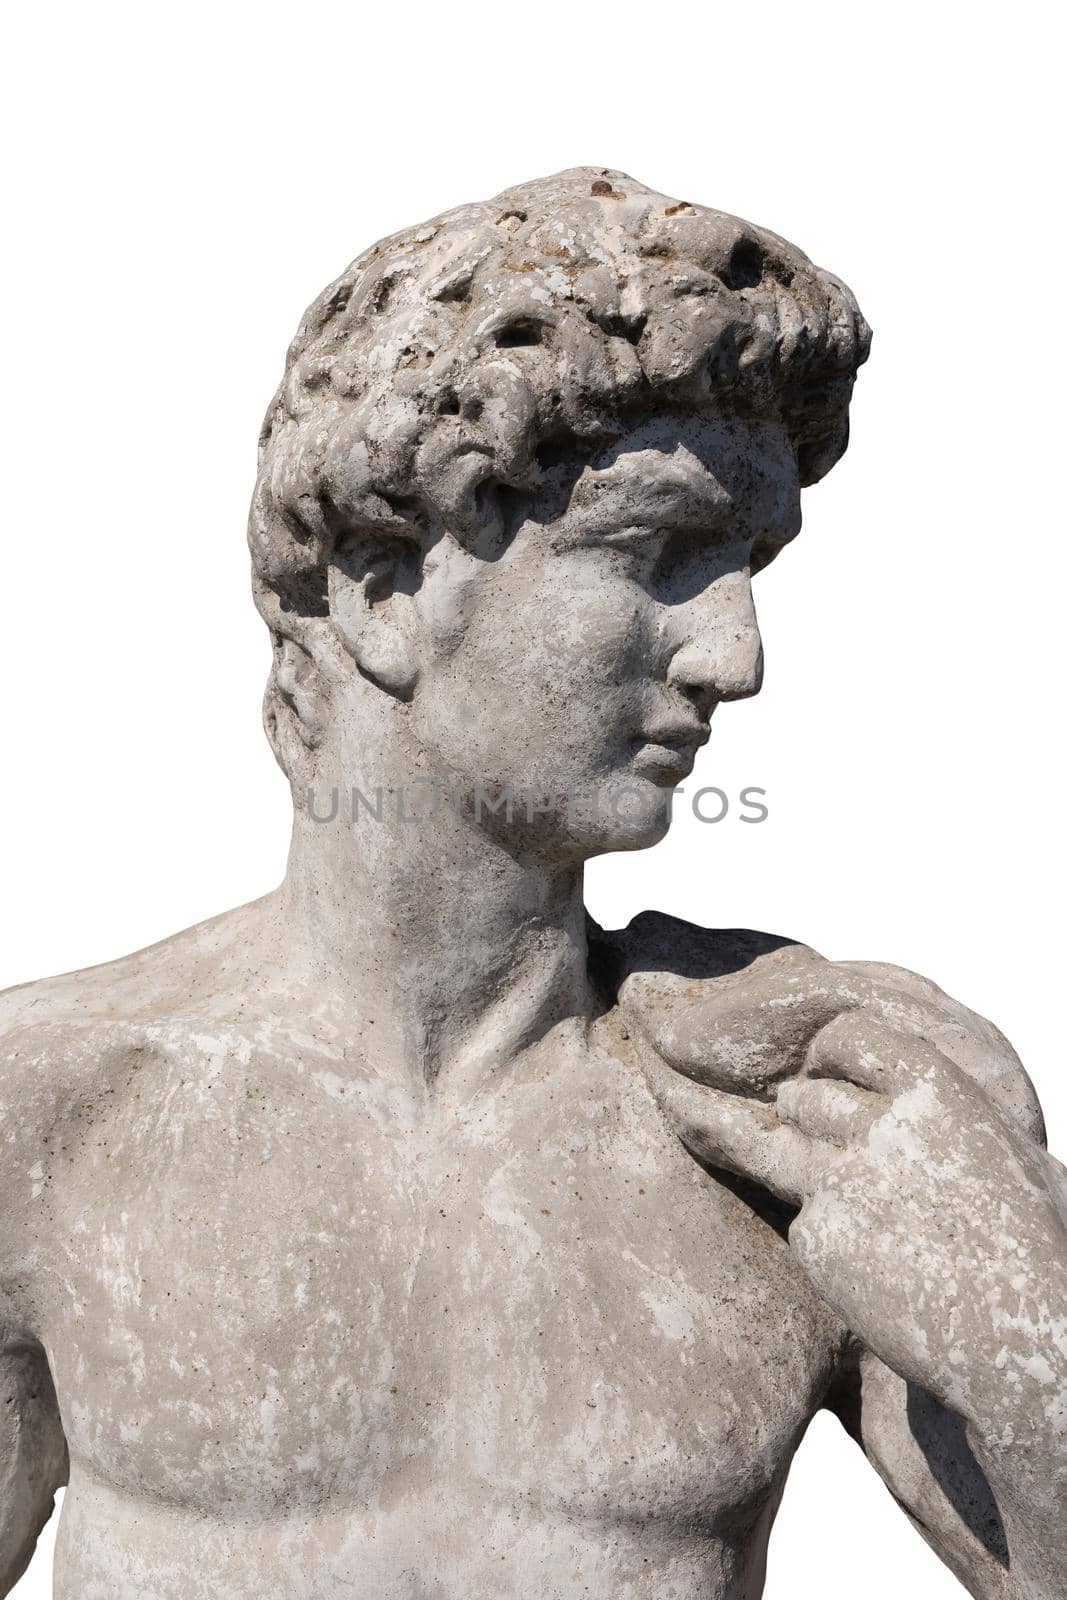 Close up side view of ancient stone sculpture of naked man on white background. art and classical style romantic figurative stone sculpture.